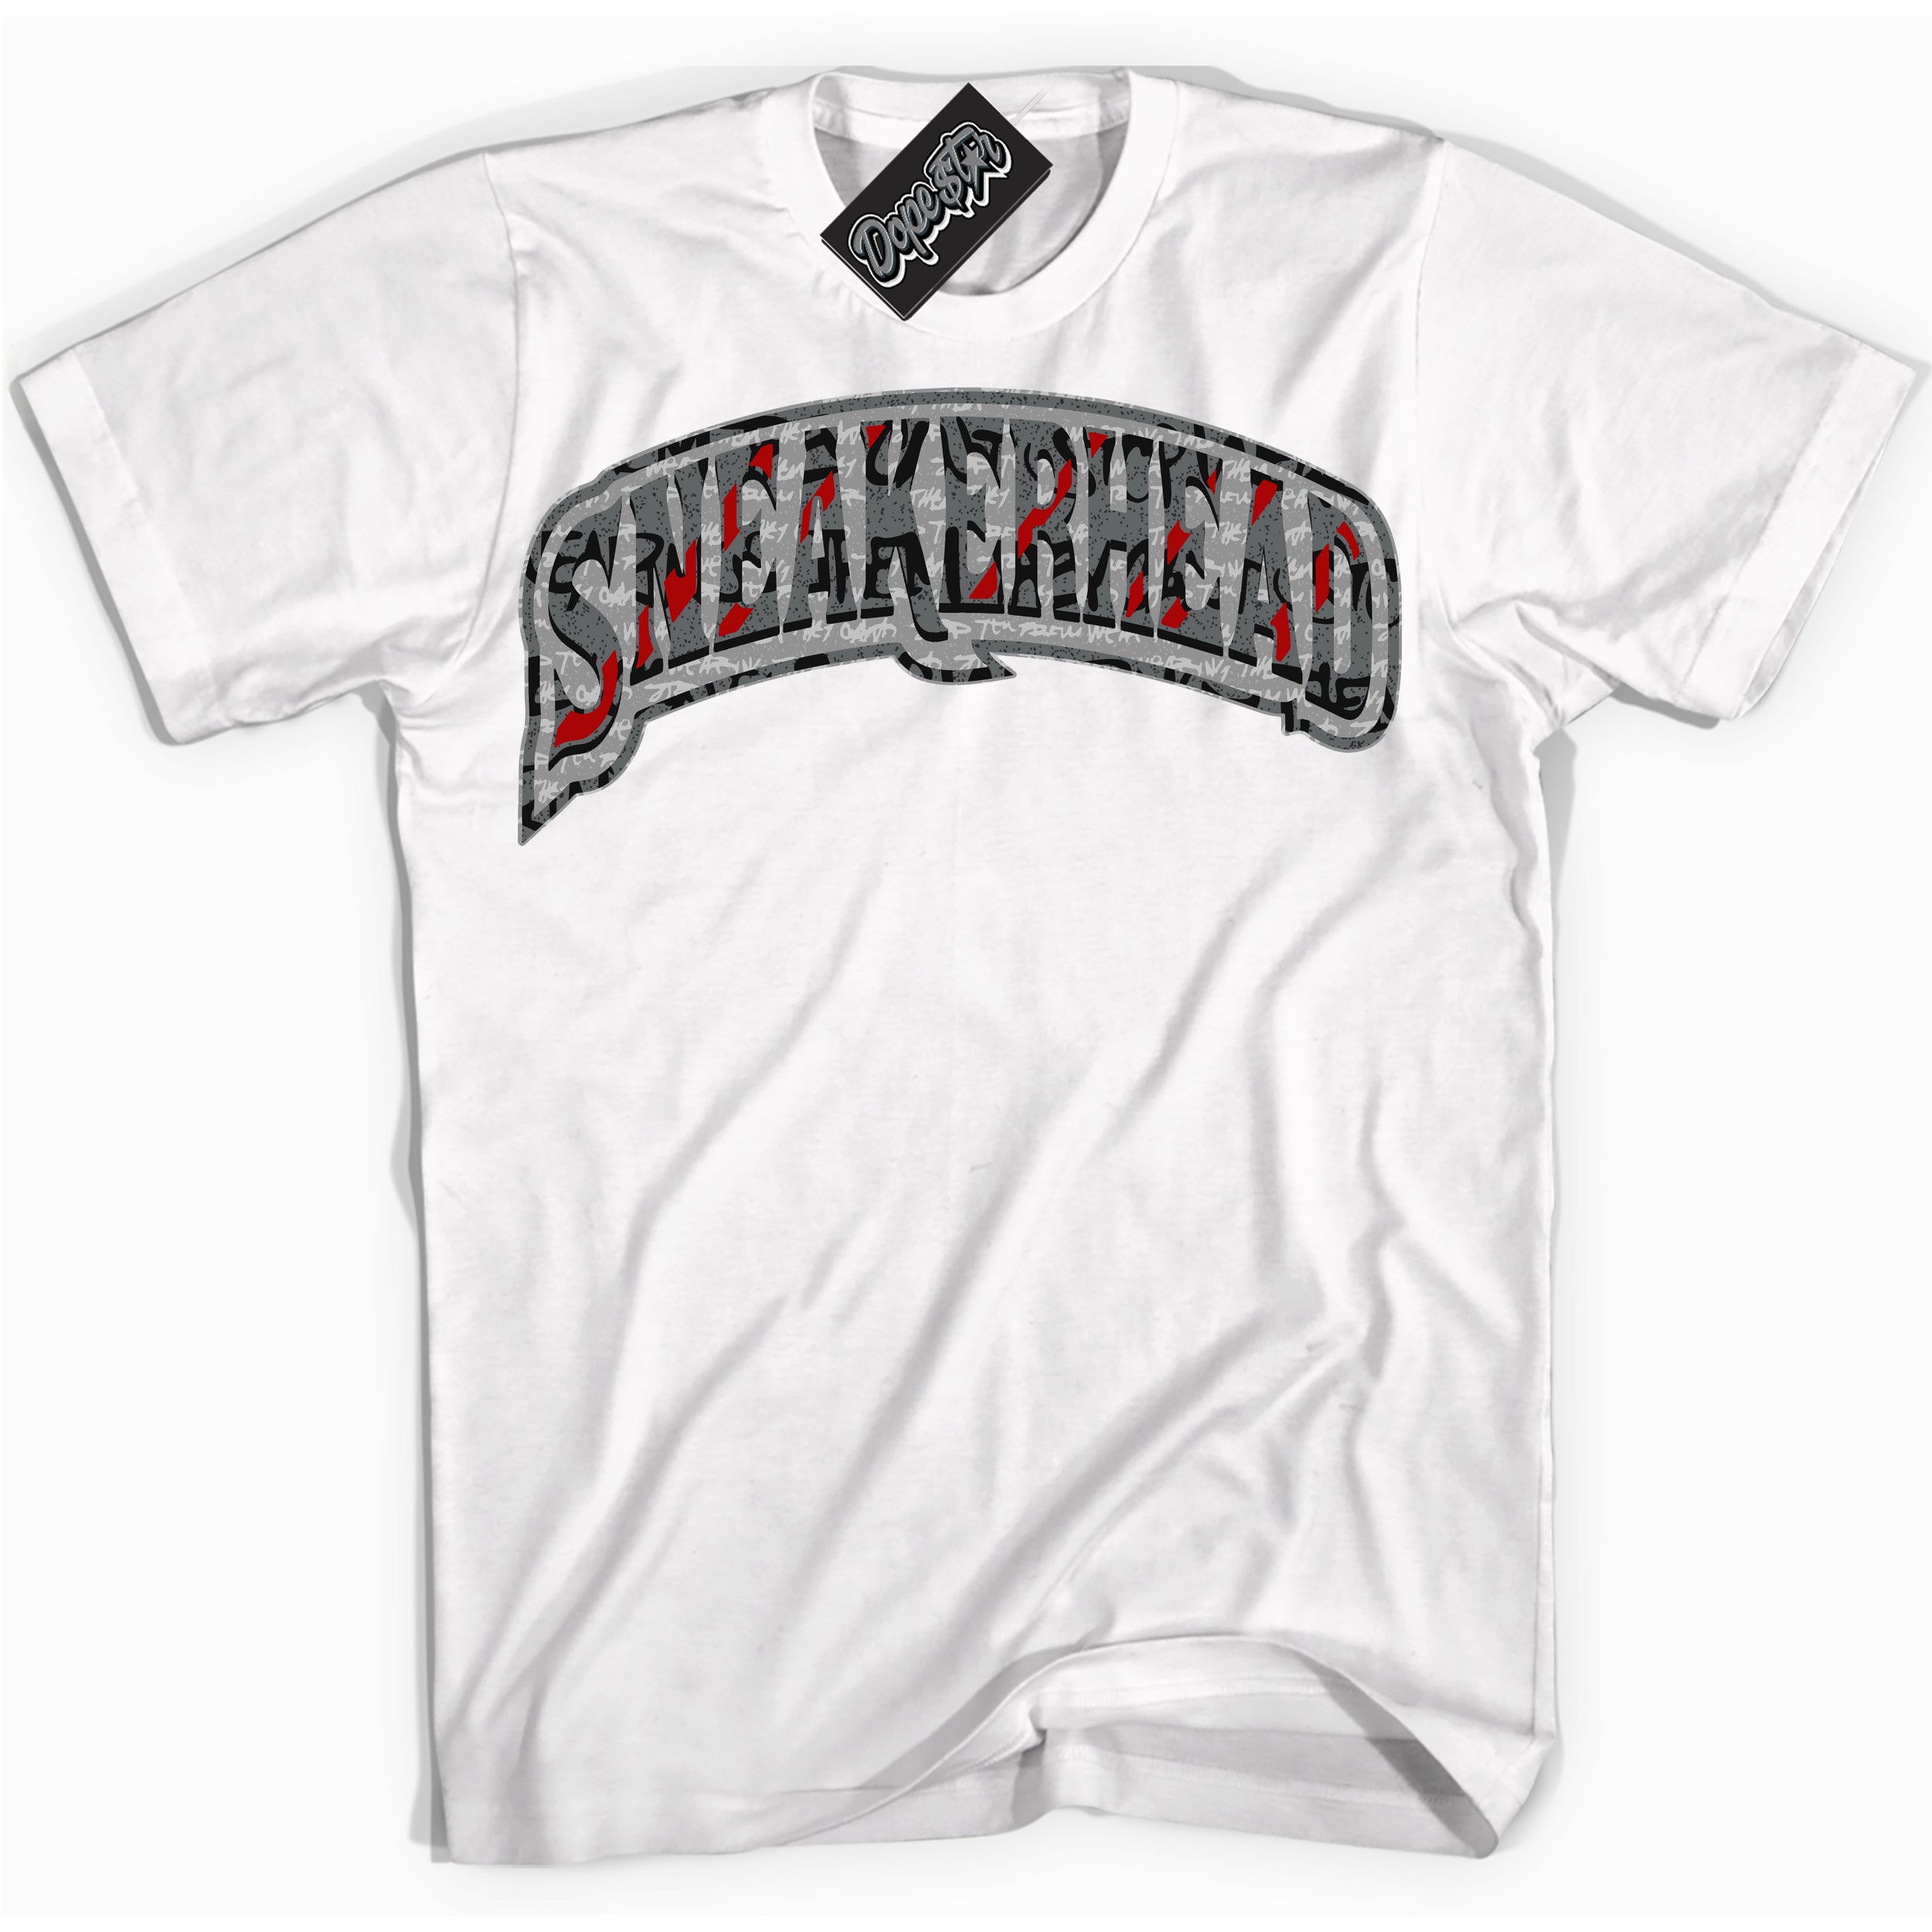 Cool White Shirt with “ Sneakerhead ” design that perfectly matches Rebellionaire 1s Sneakers.